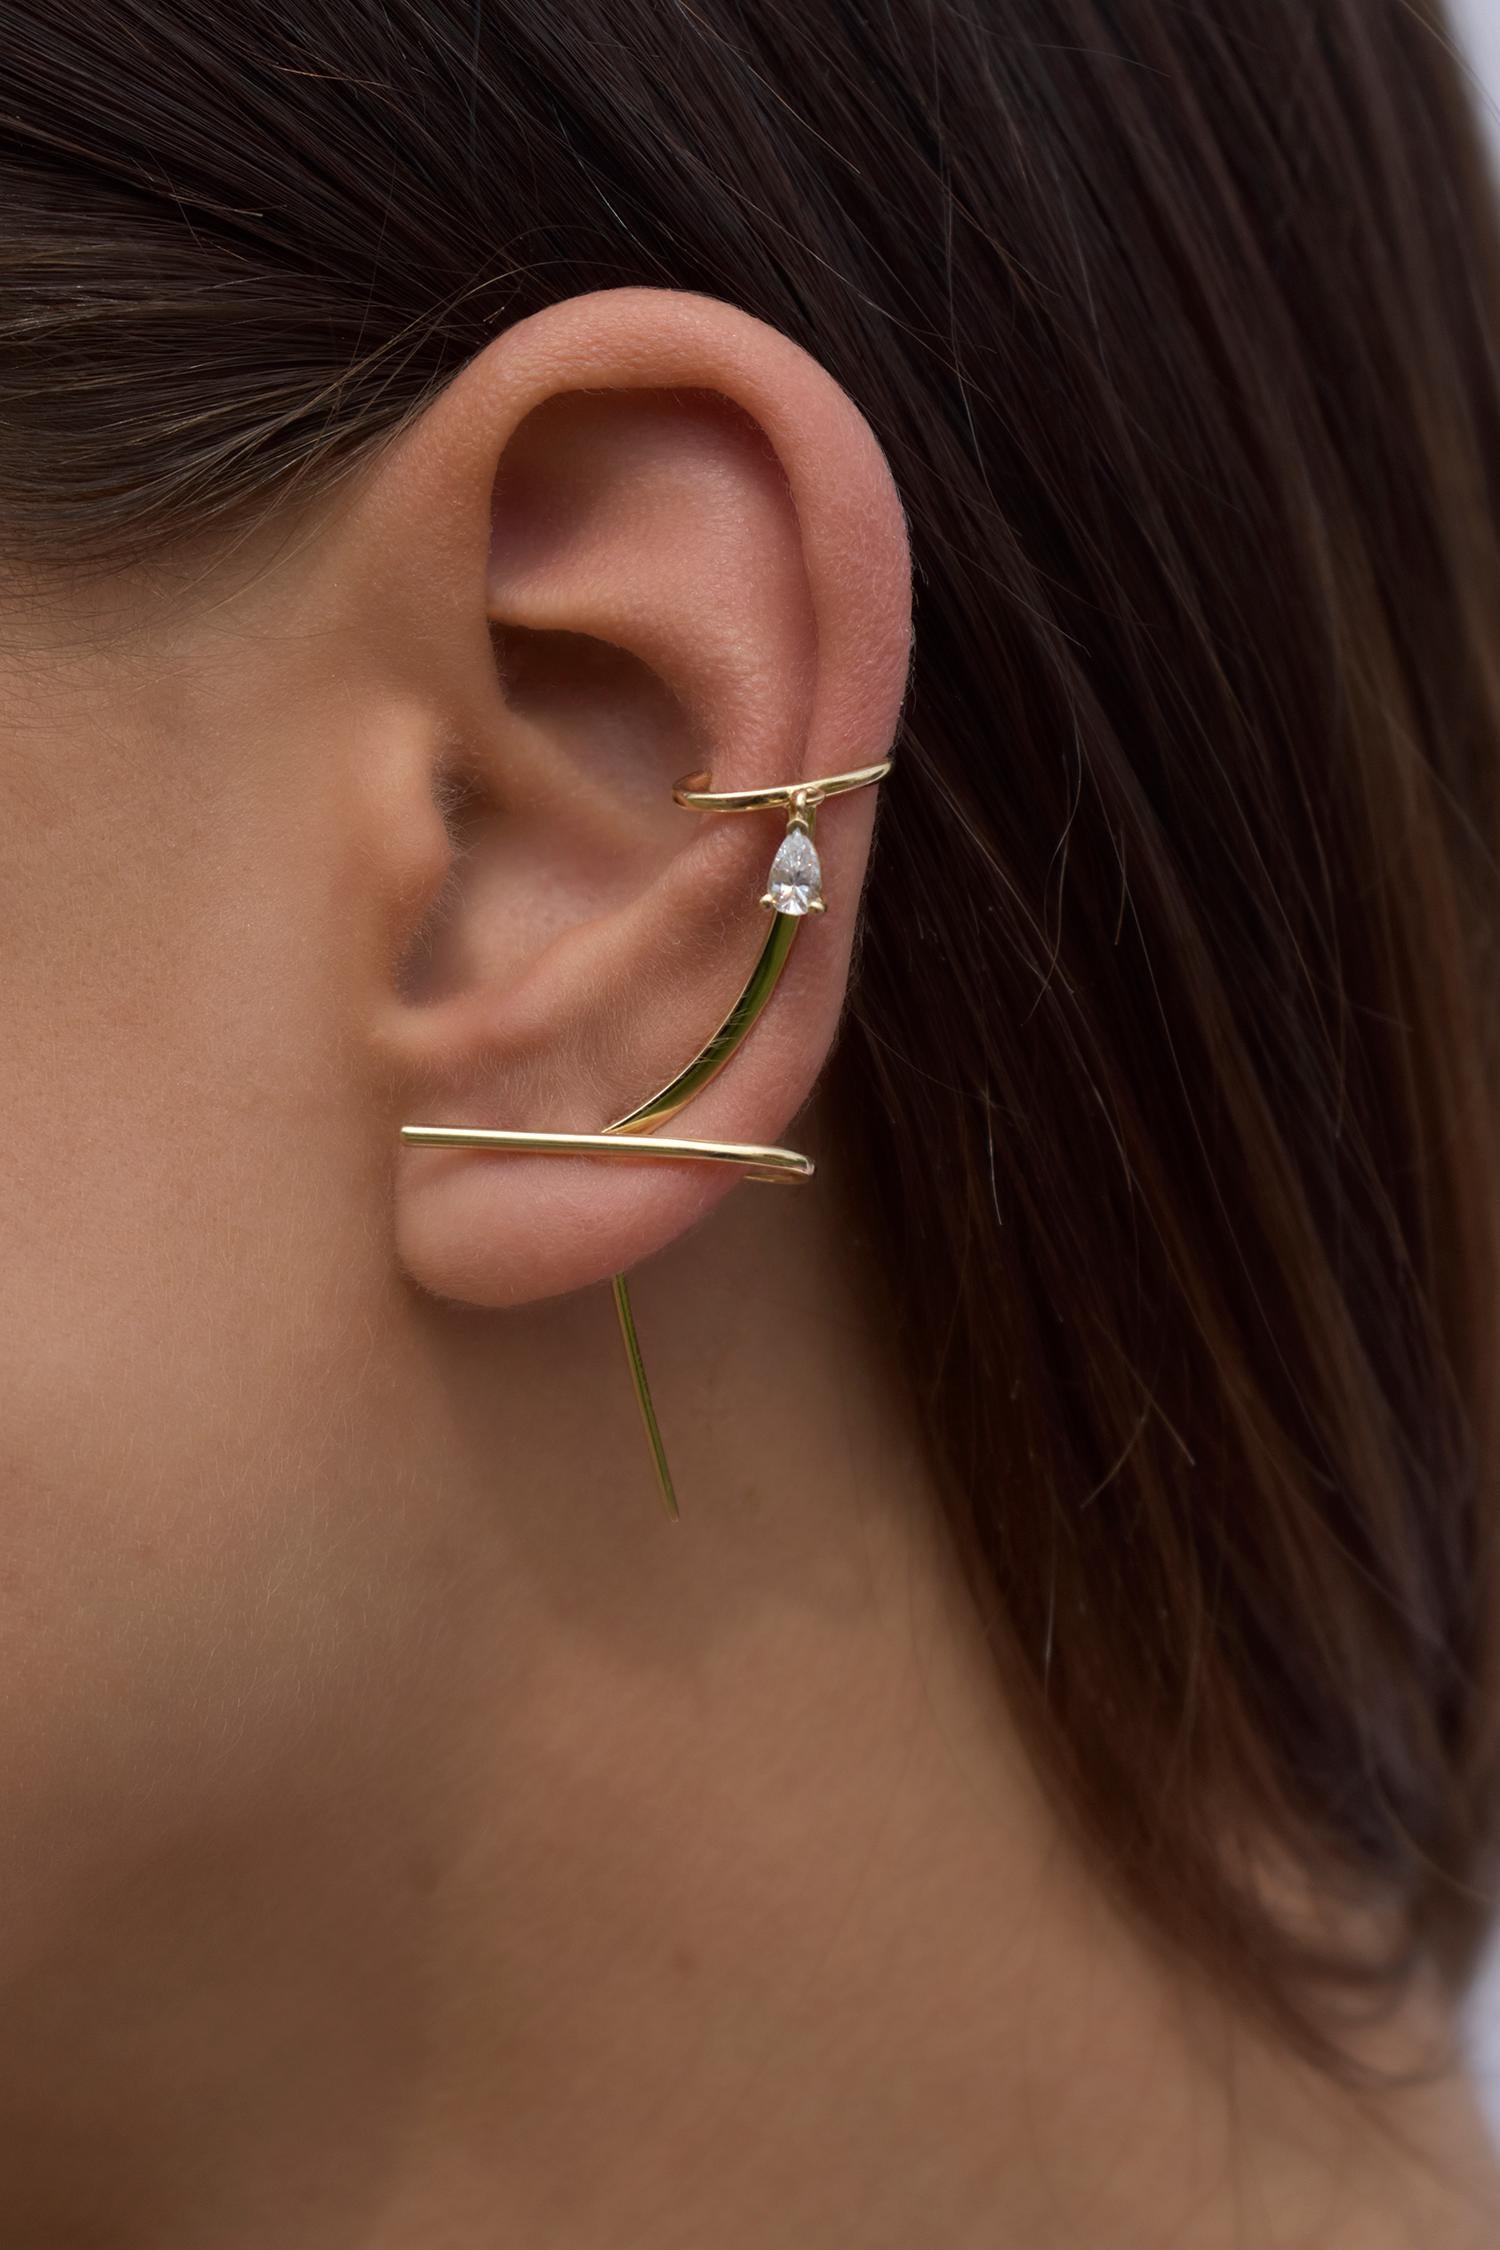 The Daina Cuff Needle Gold Earring is a statement earring in solid 14k gold, featuring a pear shape diamond. It subtle curve follows the outline of your ear finishing in a comfortable cuff with a diamond dangle reflecting the light. 

How to wear